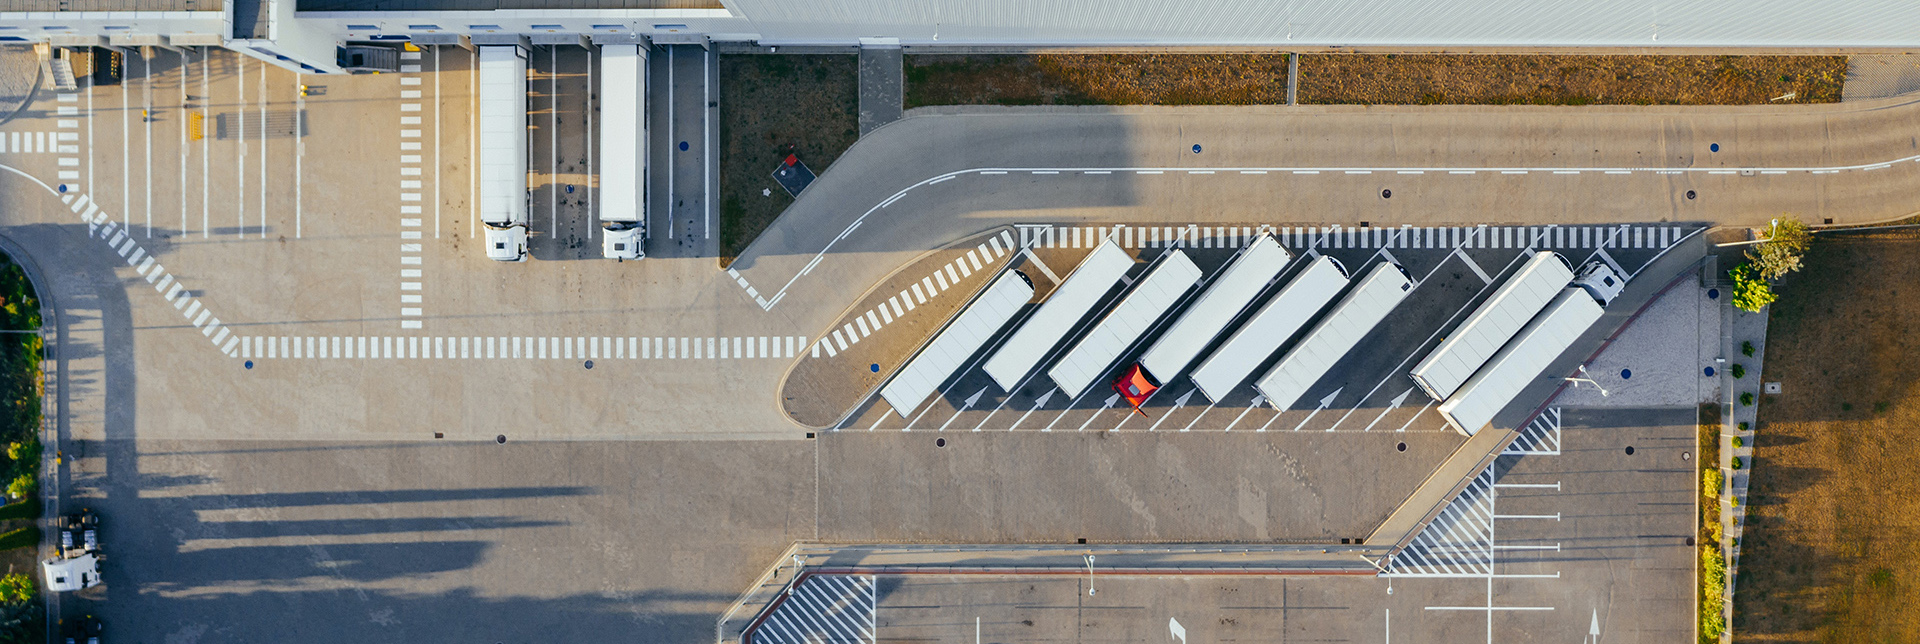 Trucks from above.